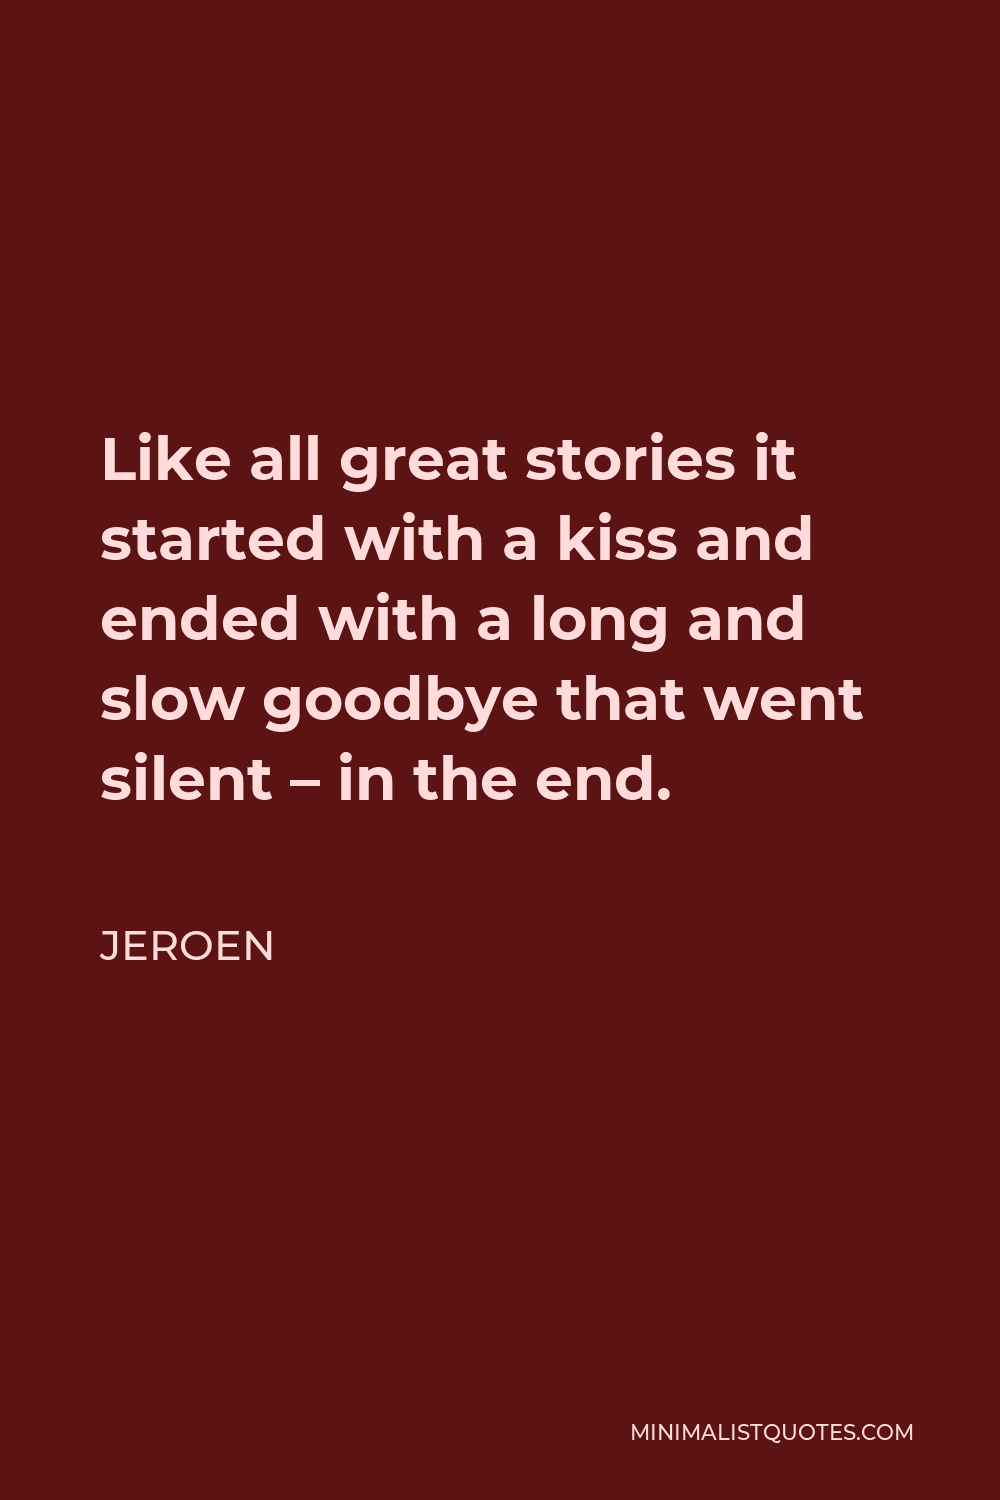 Jeroen Quote - Like all great stories it started with a kiss and ended with a long and slow goodbye that went silent – in the end.